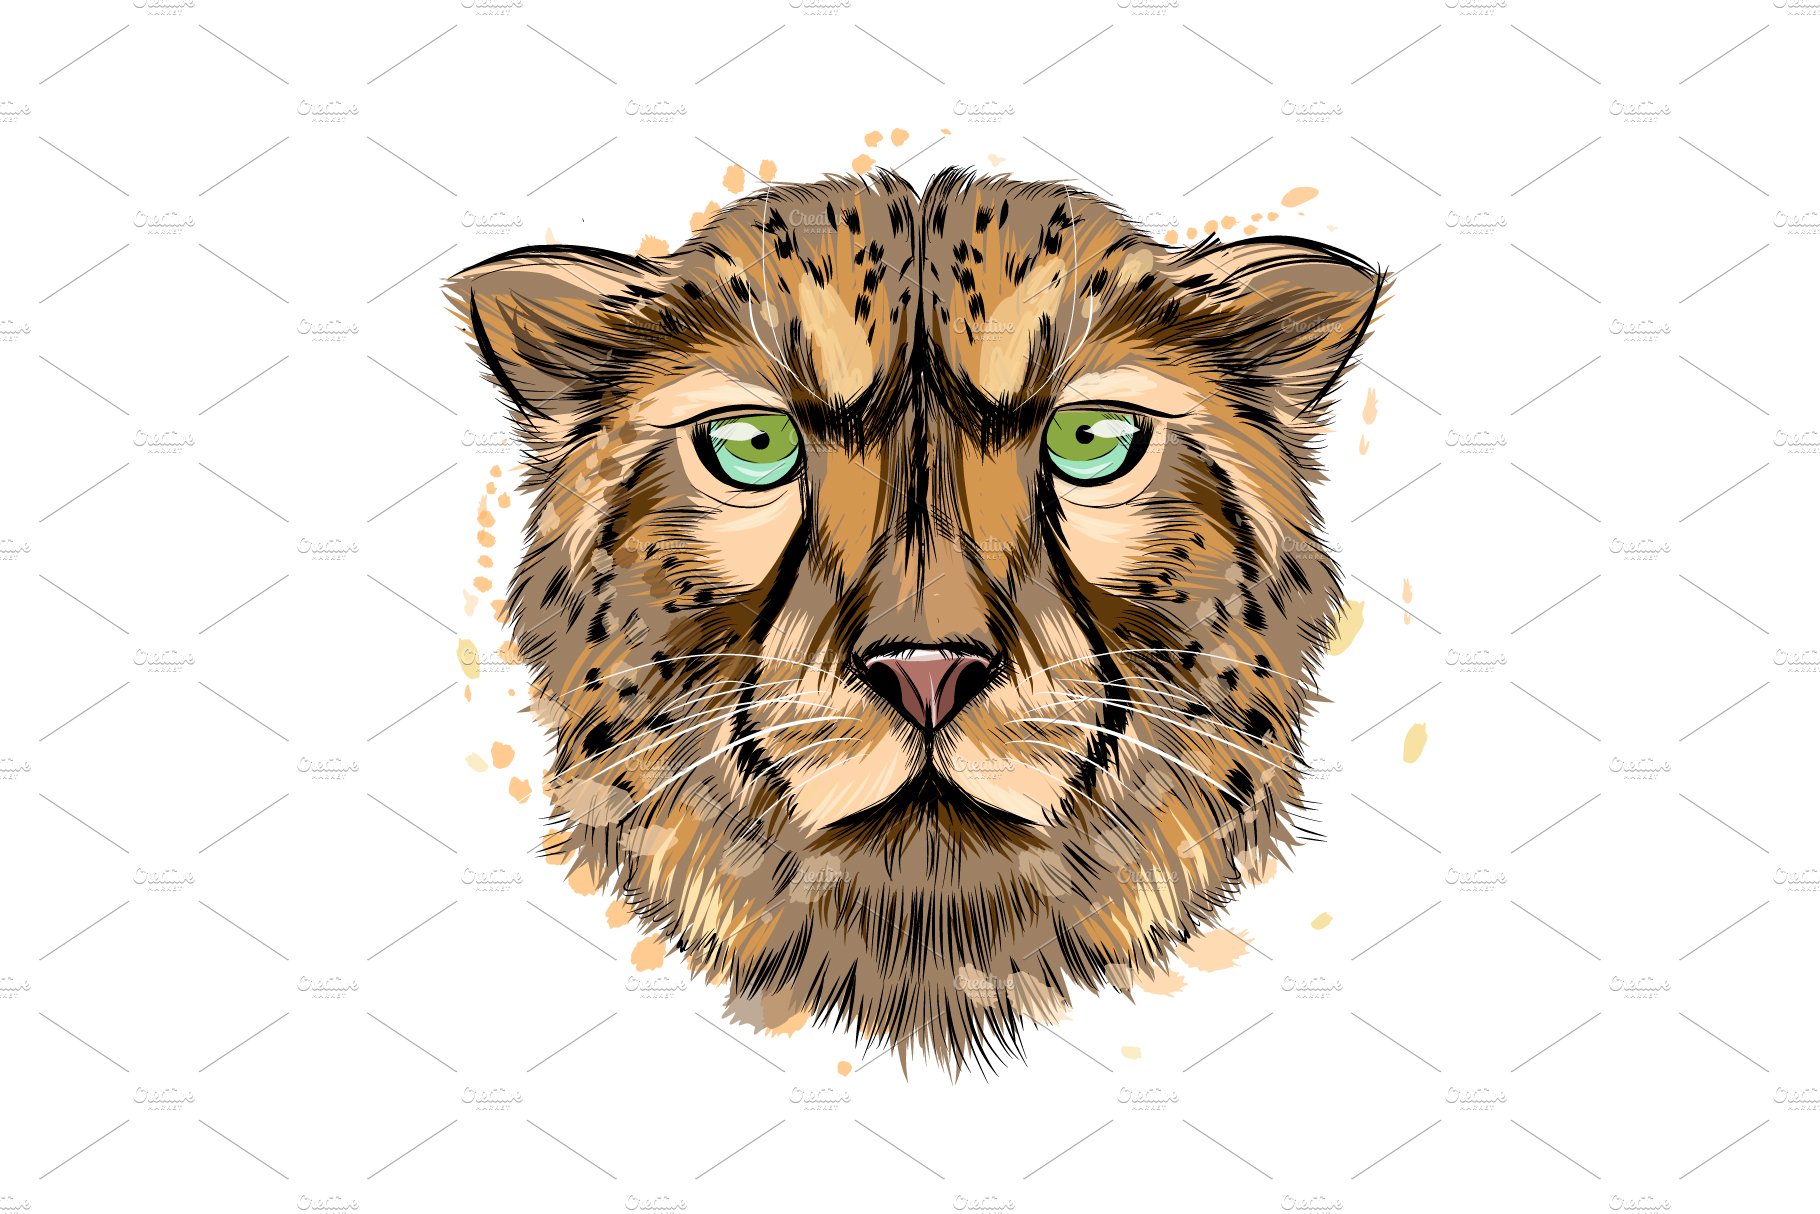 Cheetah head portrait from a splash cover image.